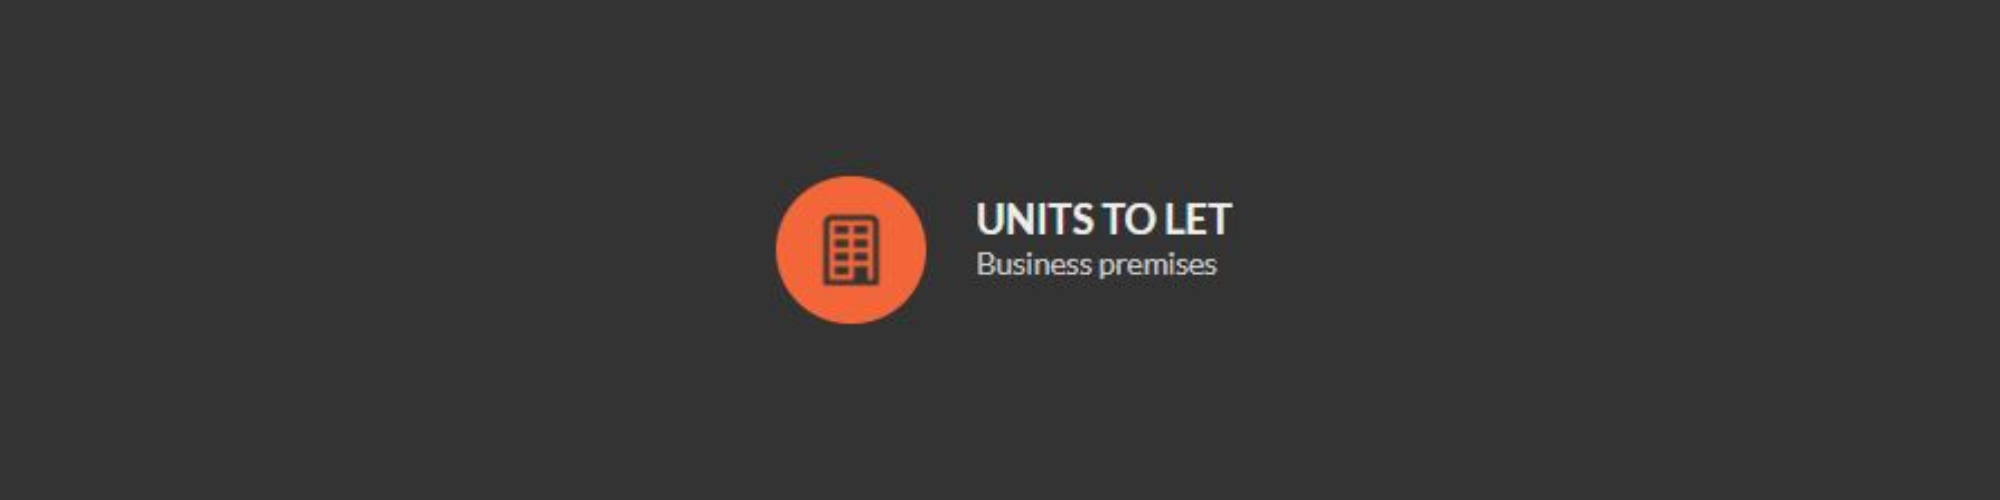 Units to Let